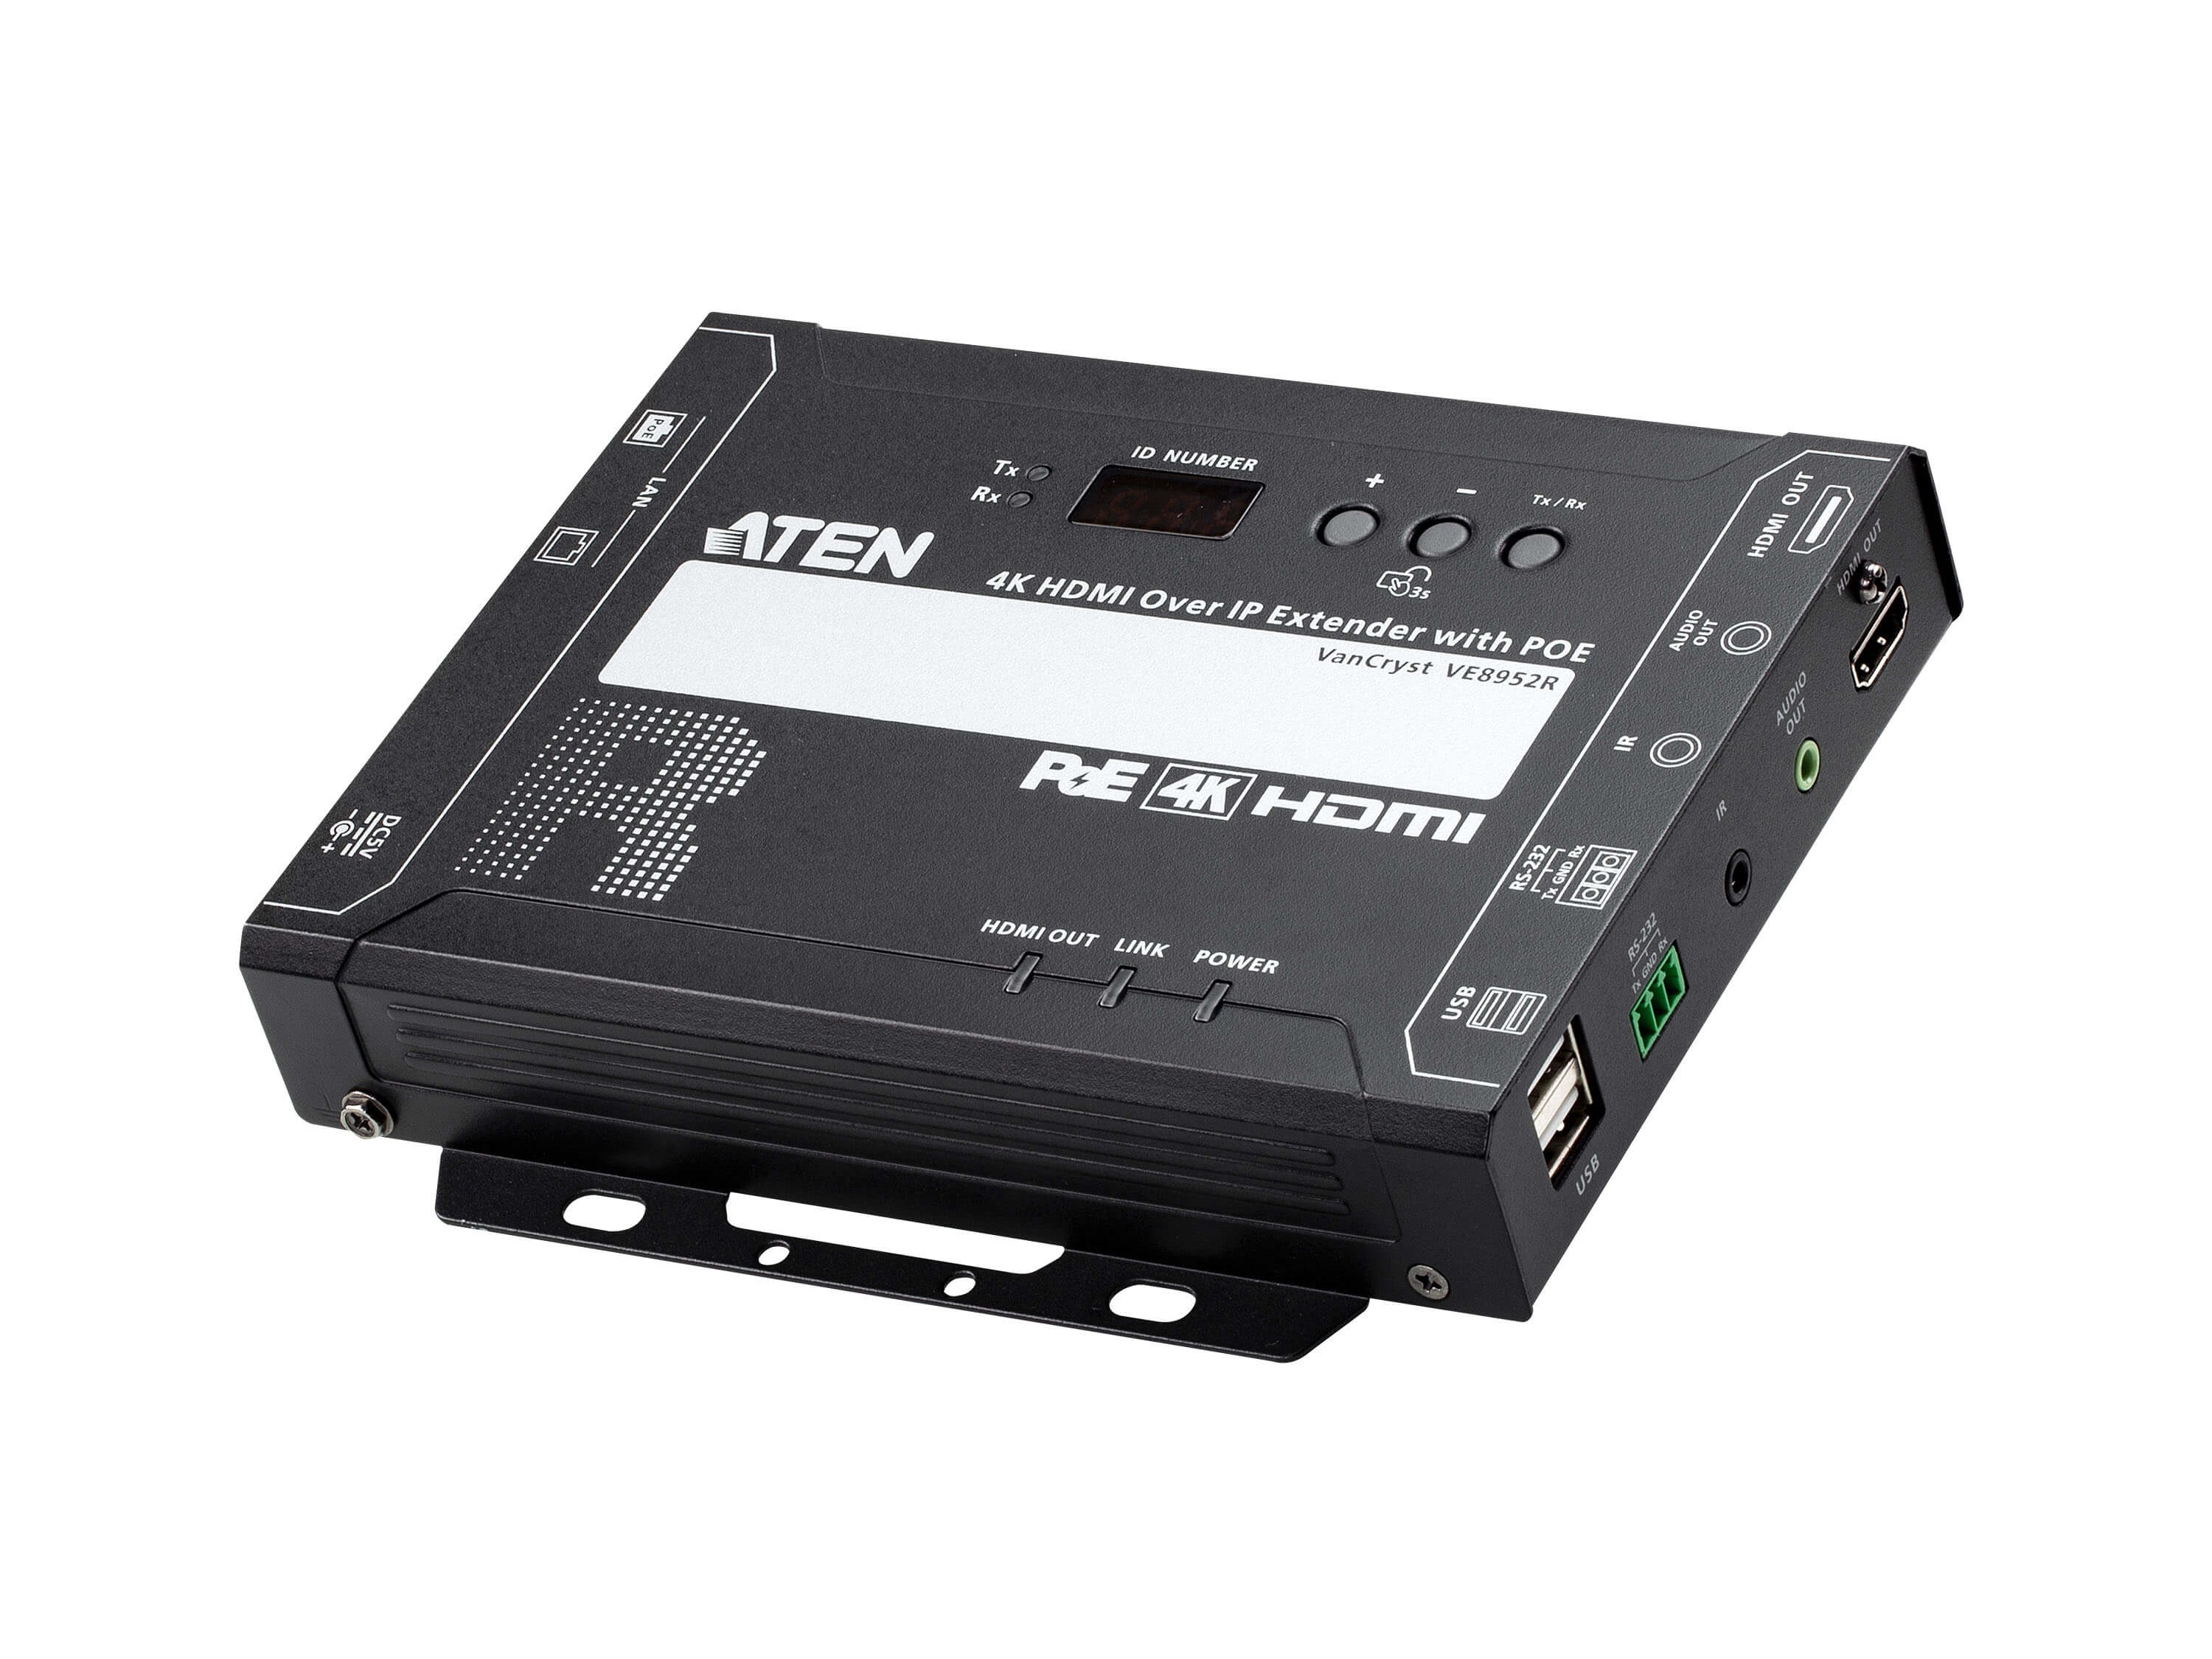 VE8952R 4K HDMI over IP Receiver with PoE by Aten